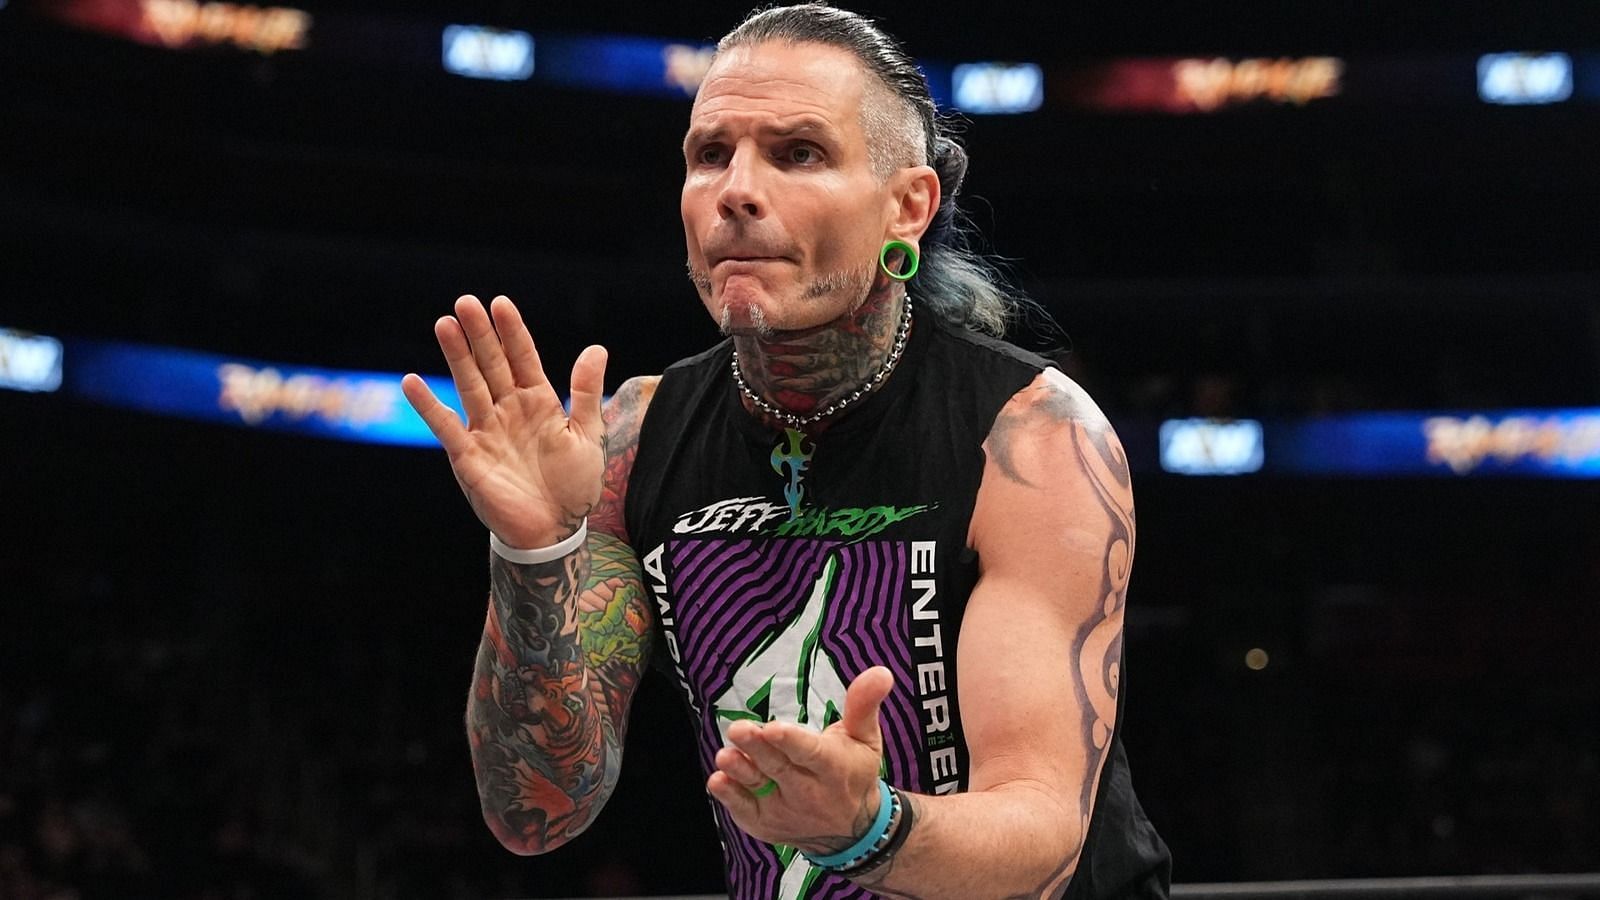 Jeff Hardy has signed with AEW since March 2022